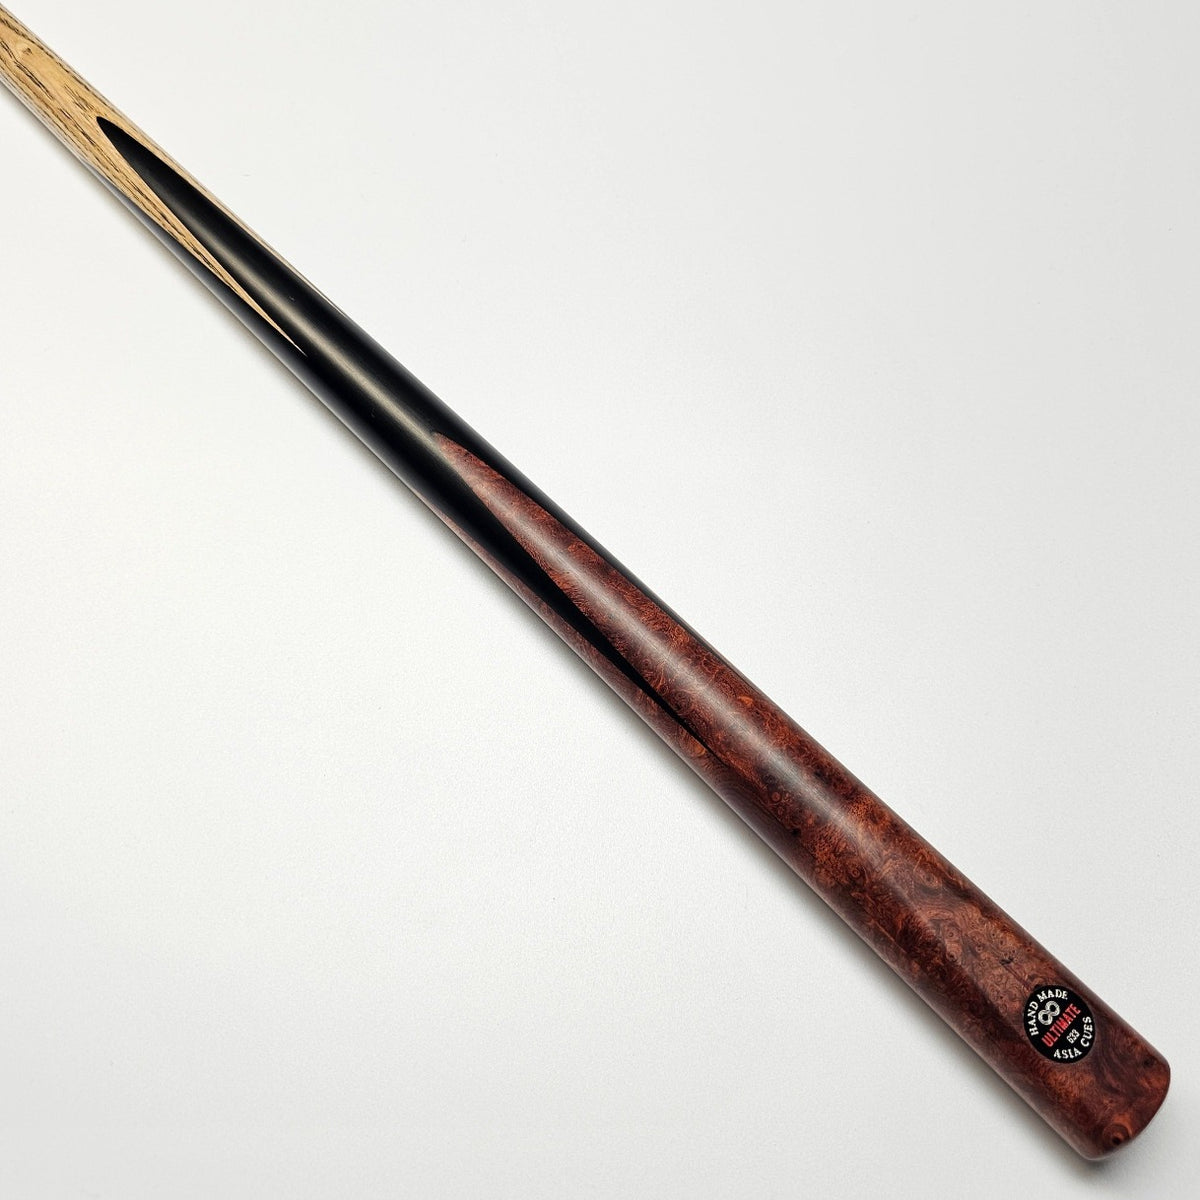 Asia Cues Ultimate No.633 - One Piece Snooker Cue  Handmade Ebony Butt with 4 lower splices of Burl wood. Butt View